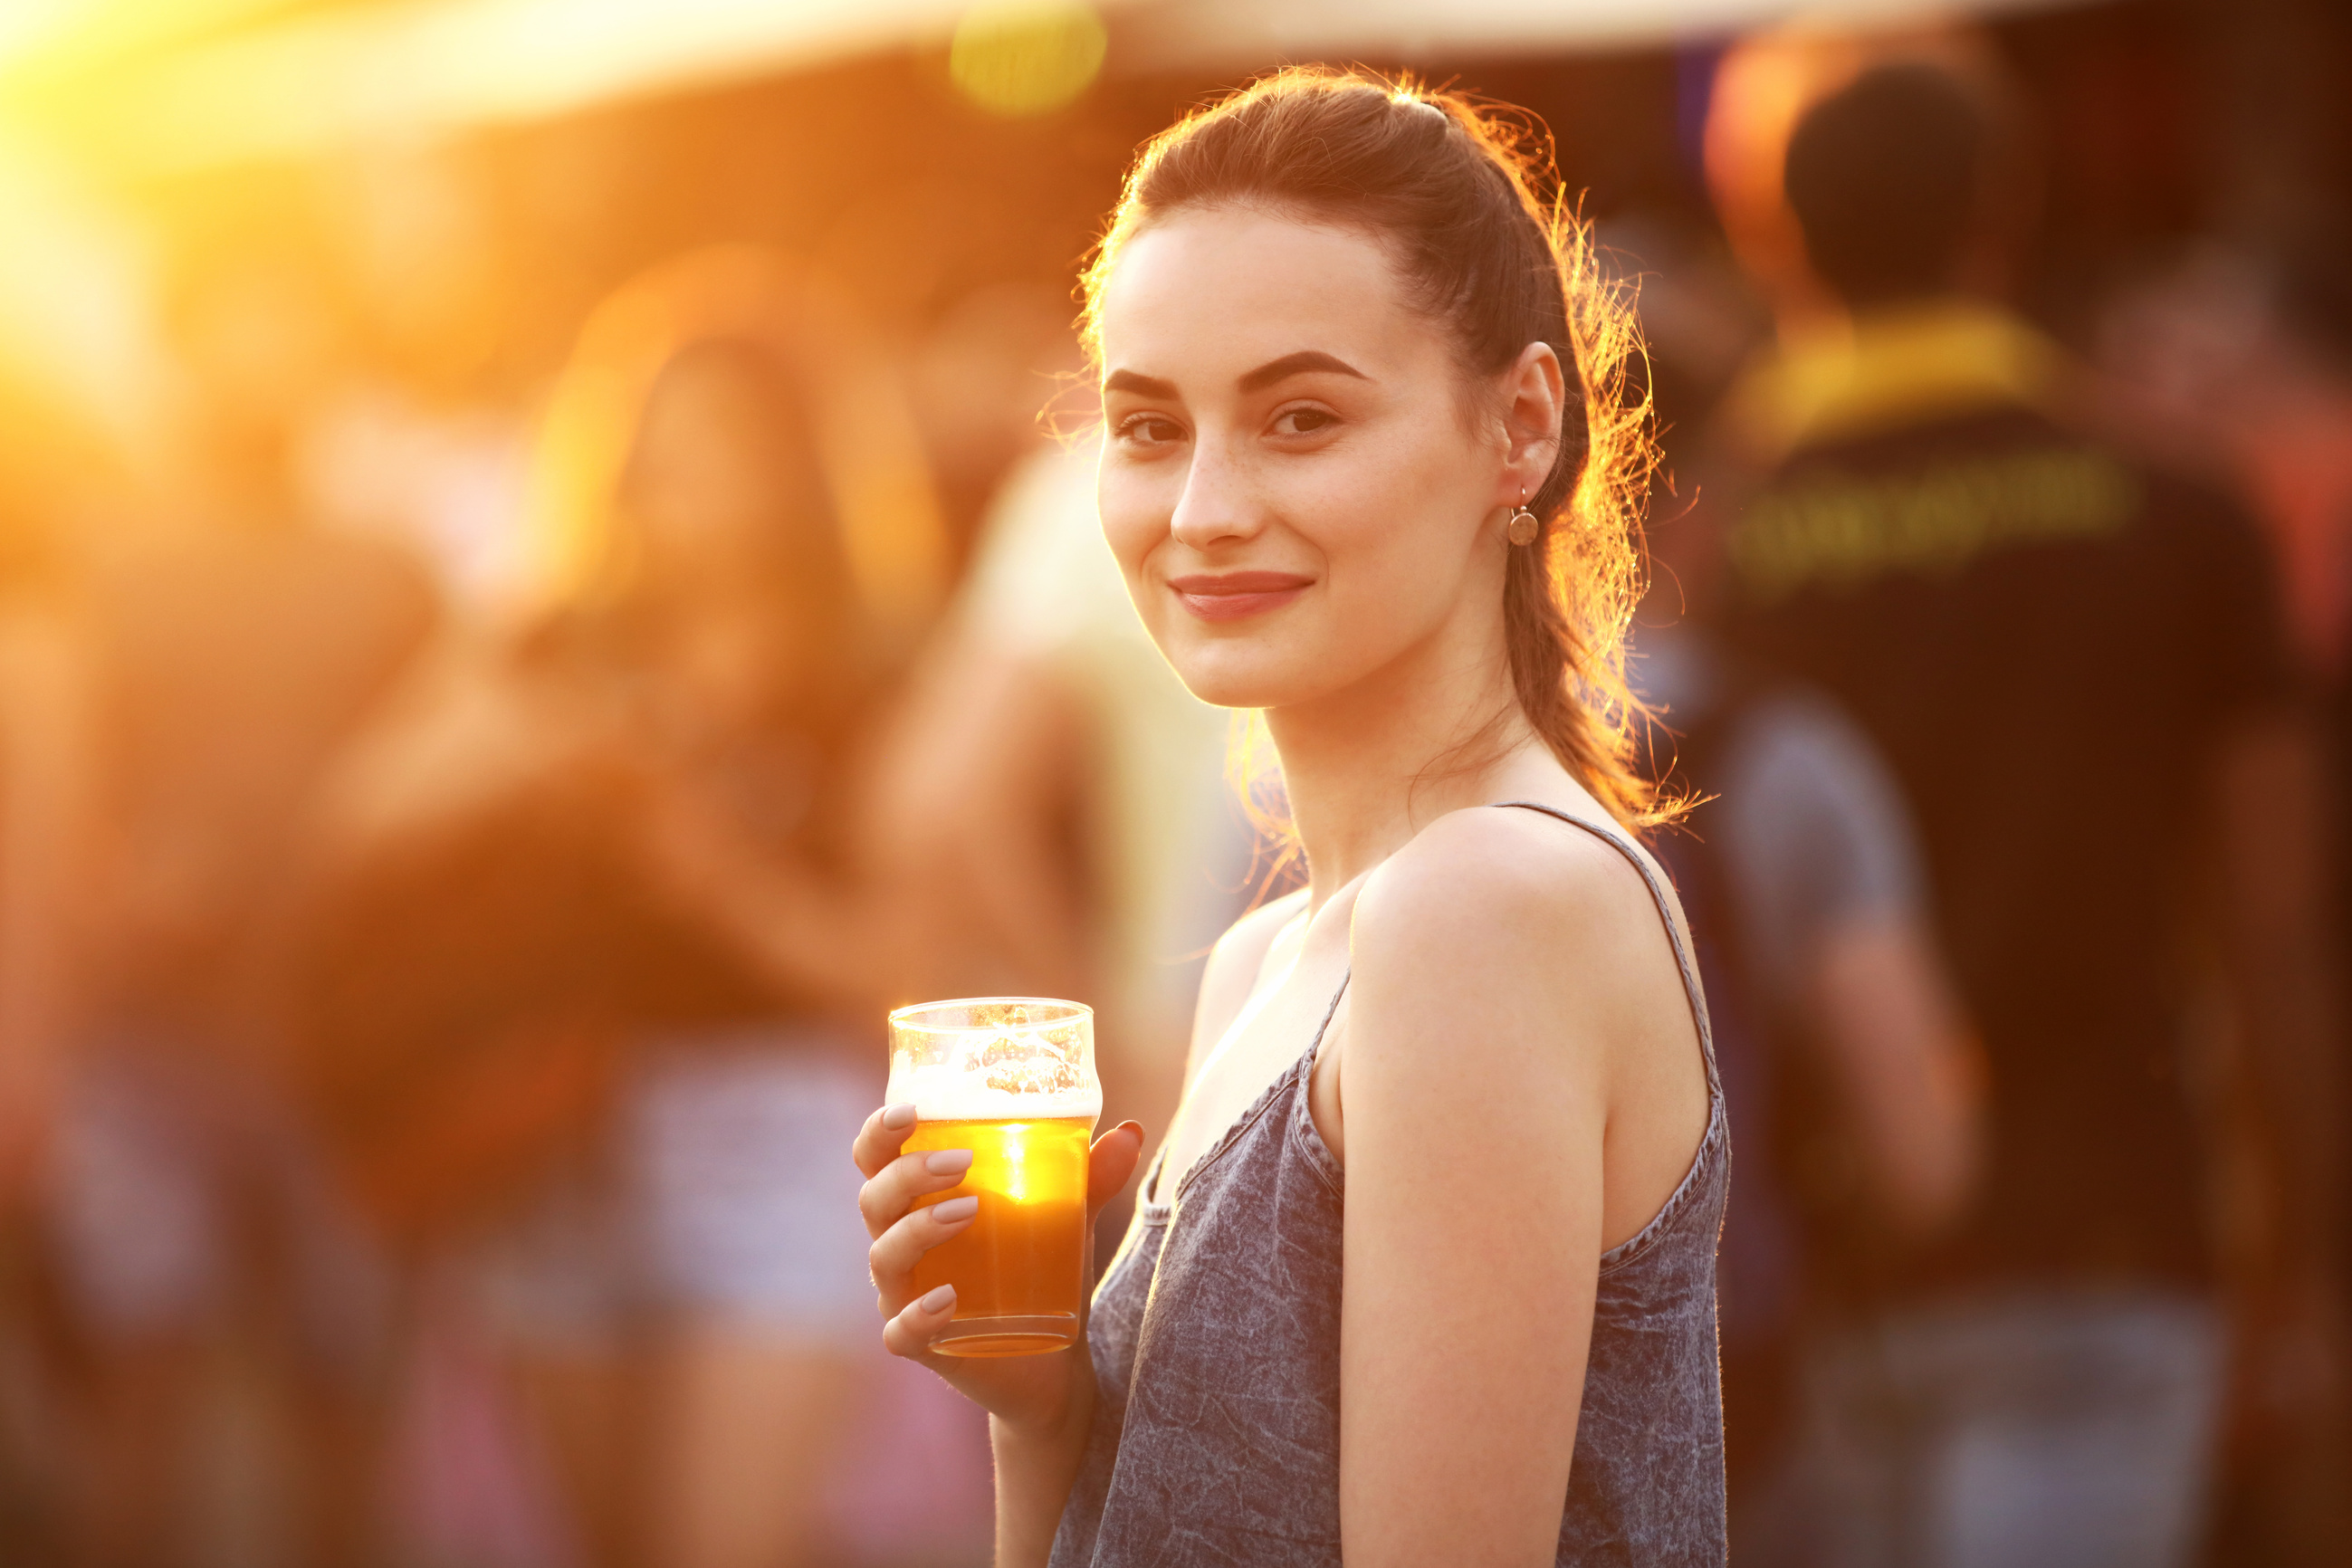 Woman Drinking Beer Outdoors